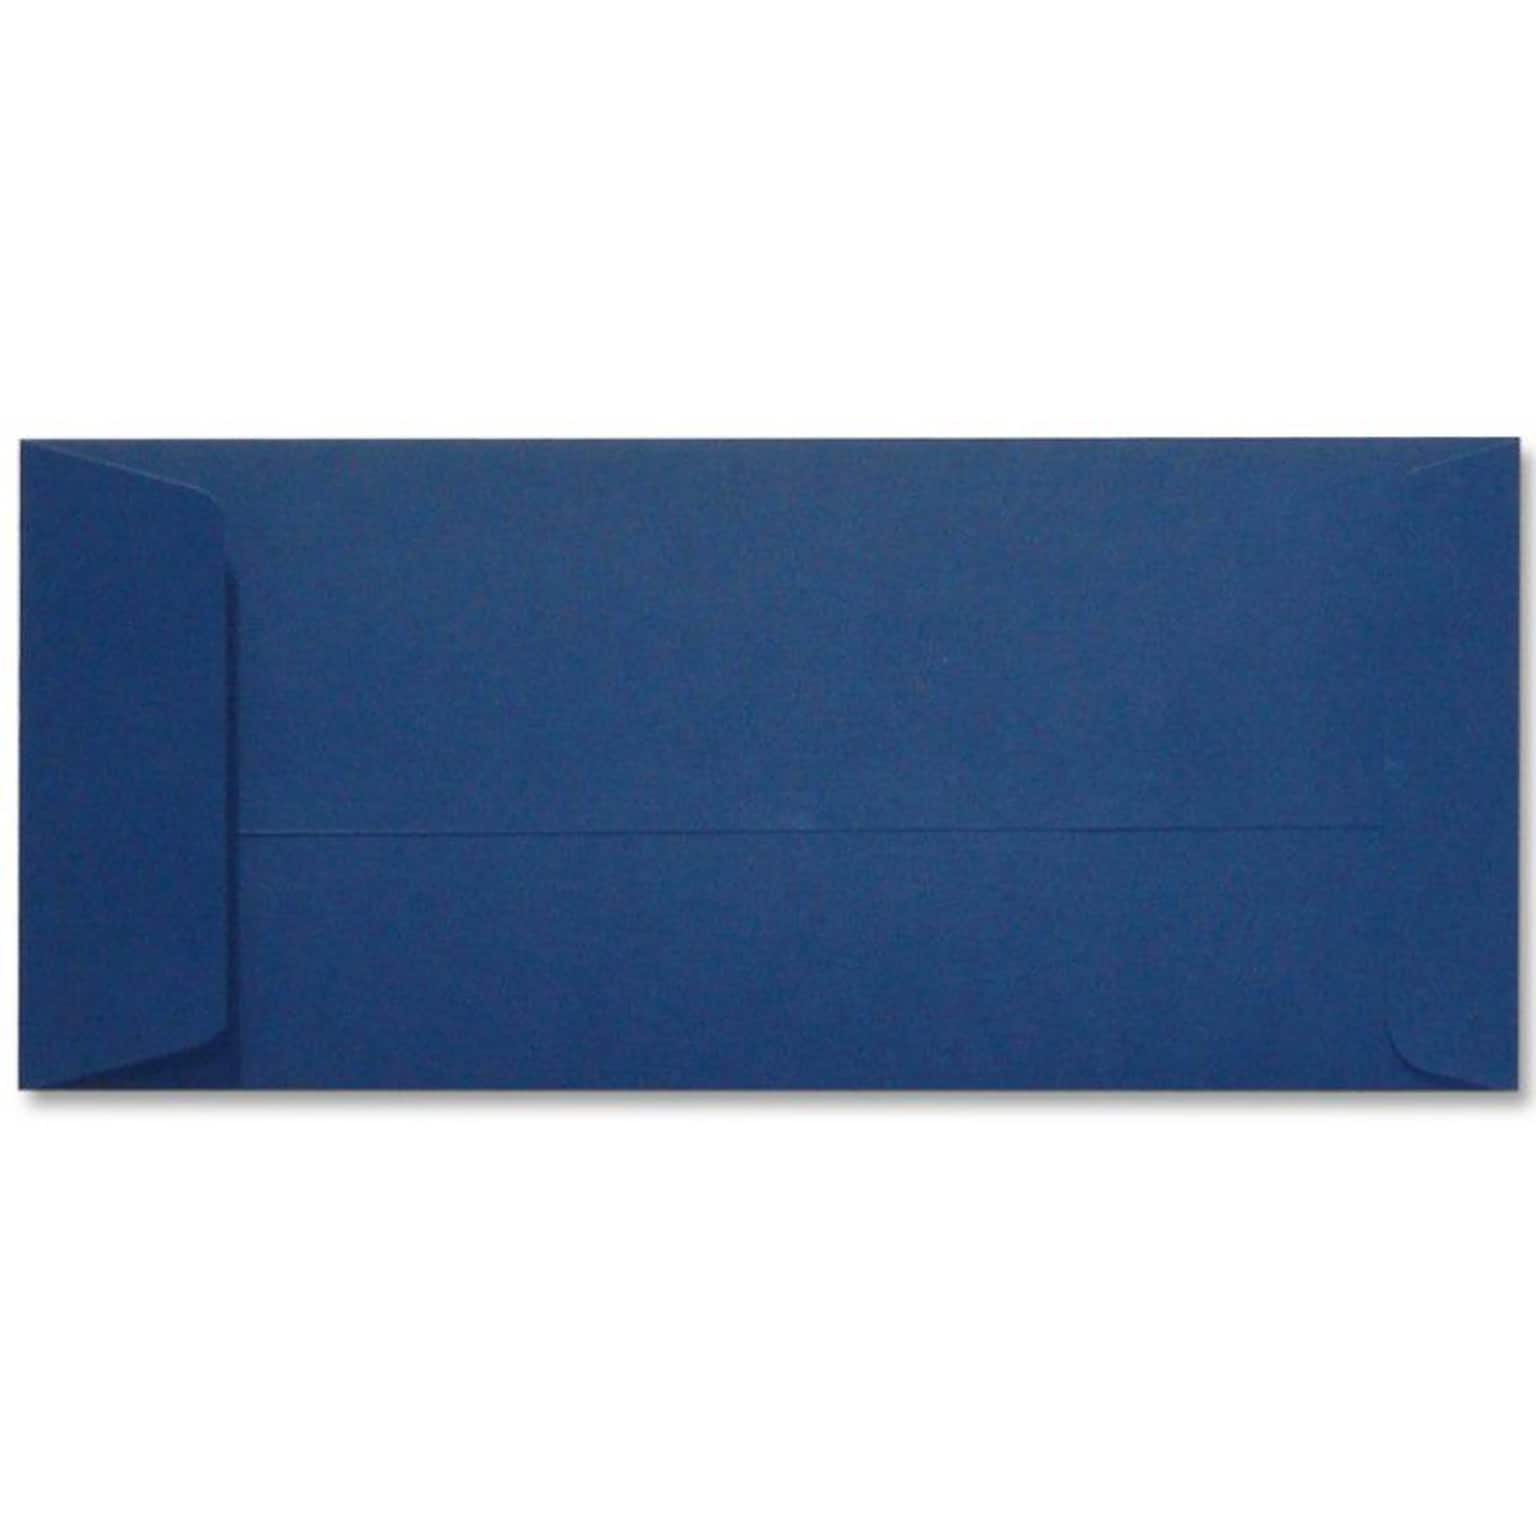 LUX 4 1/8 x 9 1/2 #10 80lbs. Open End Envelopes, Navy Blue, 50/Pack